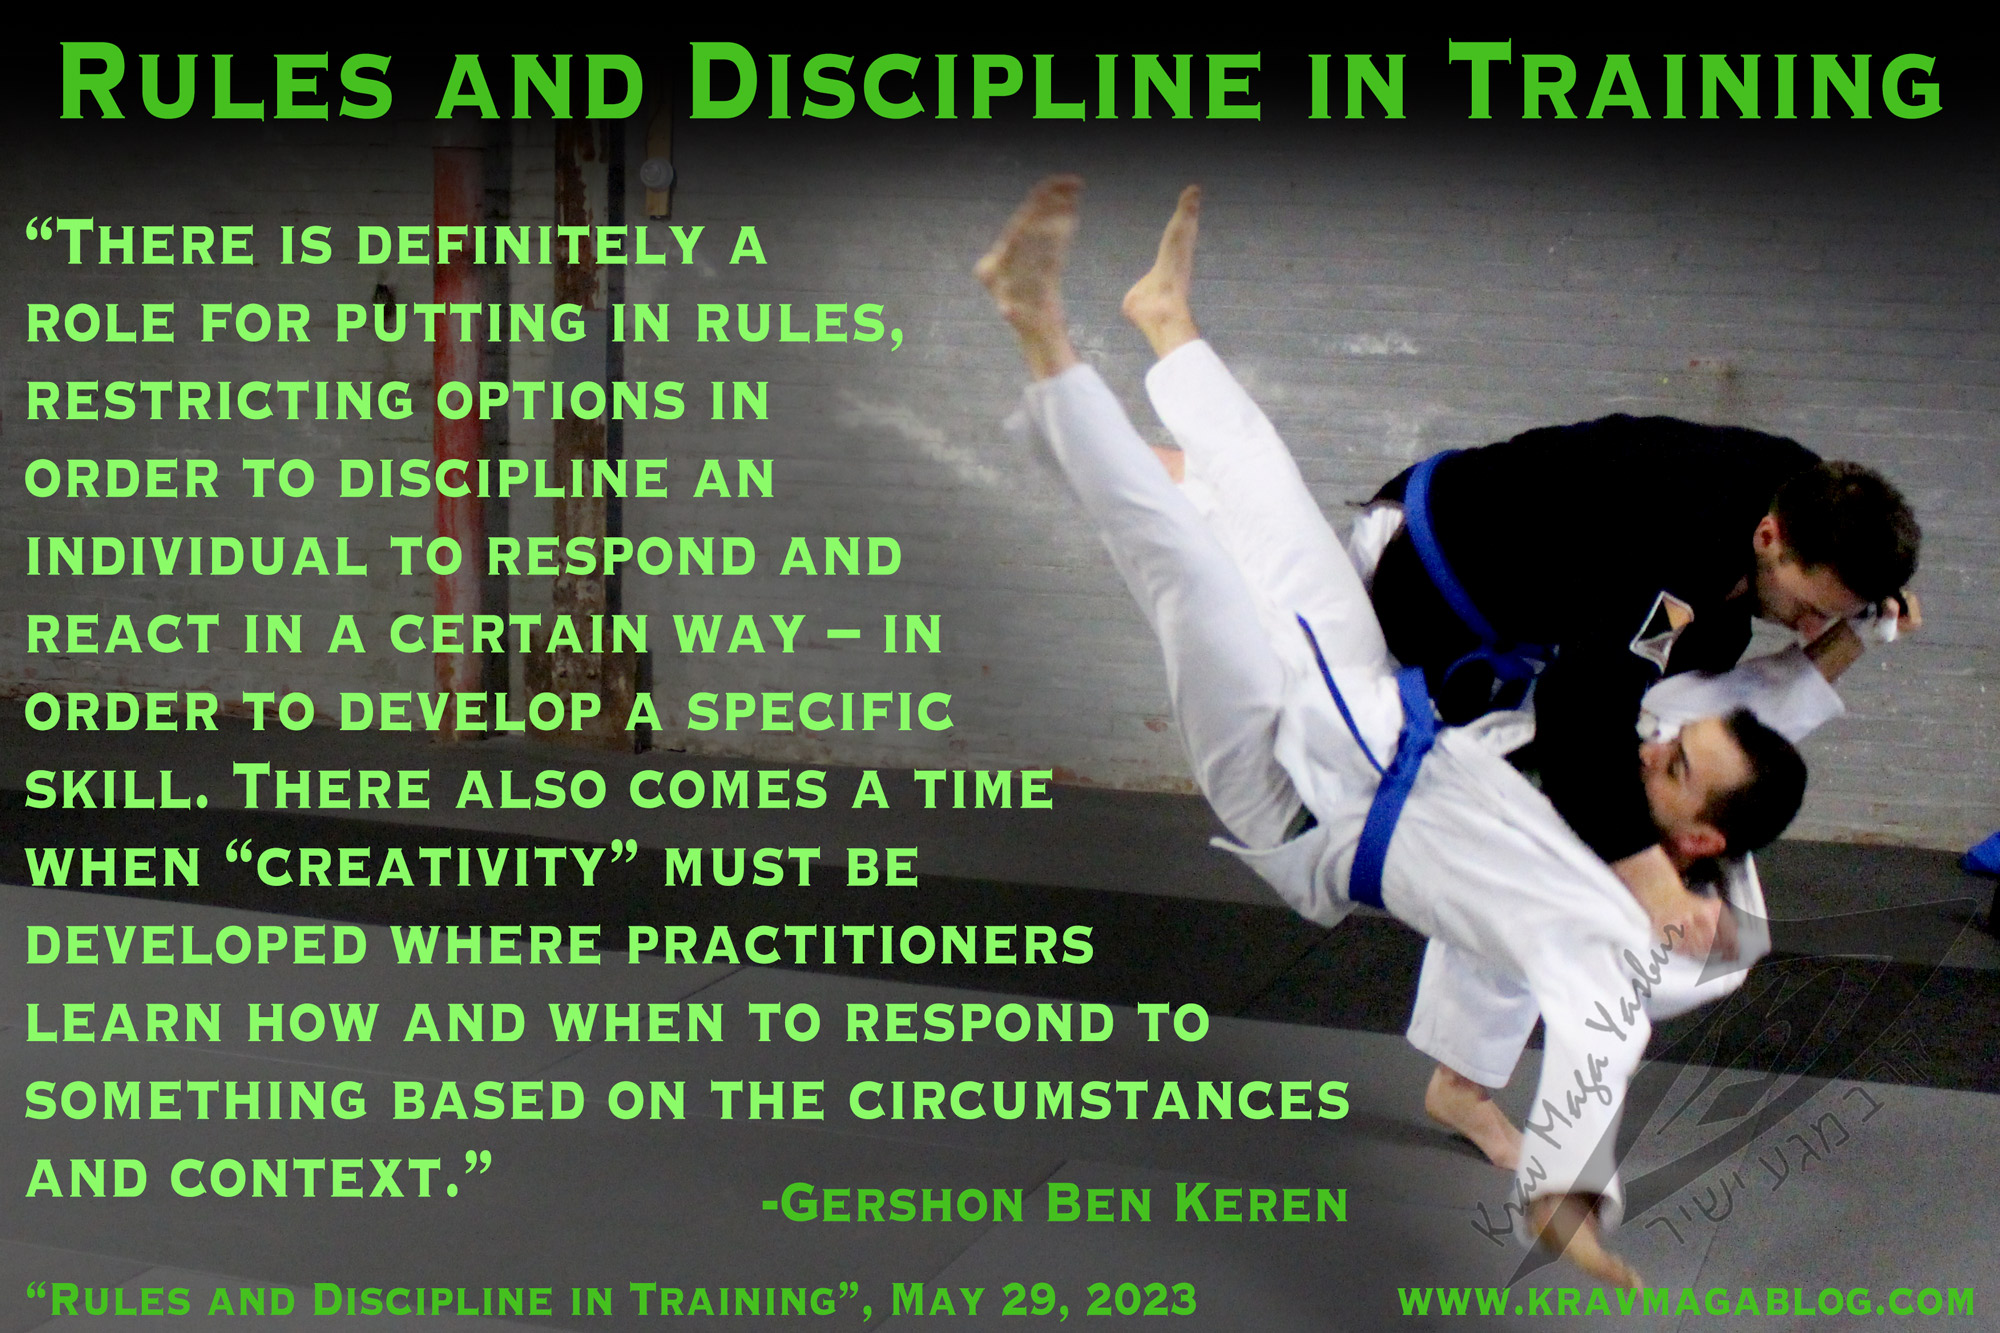 Blog About Rules And Discipline In Training